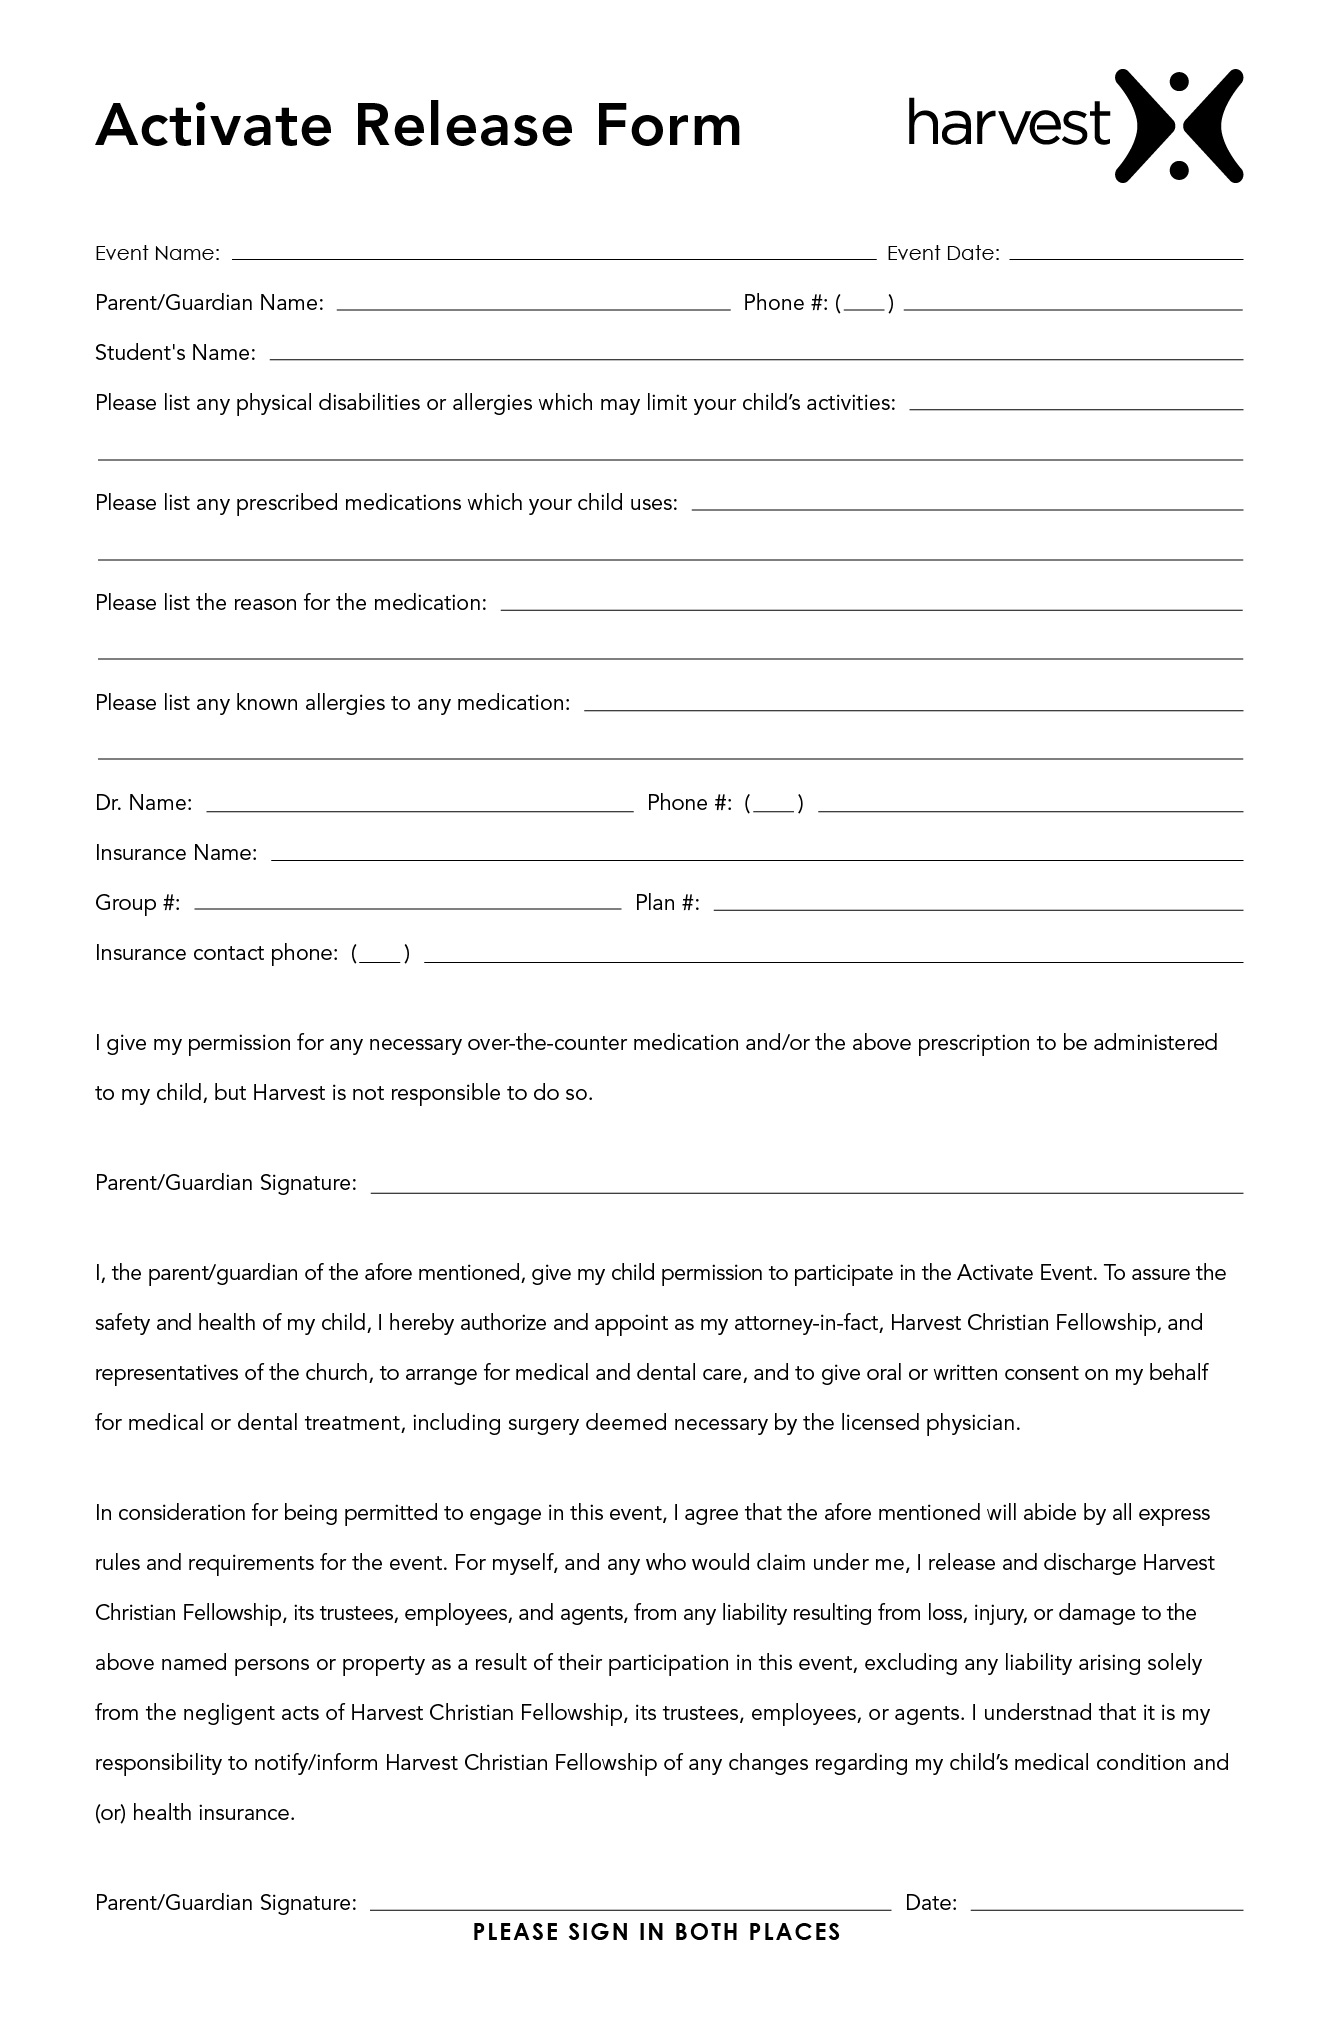 liability-waiver-release-form-free-printable-documents